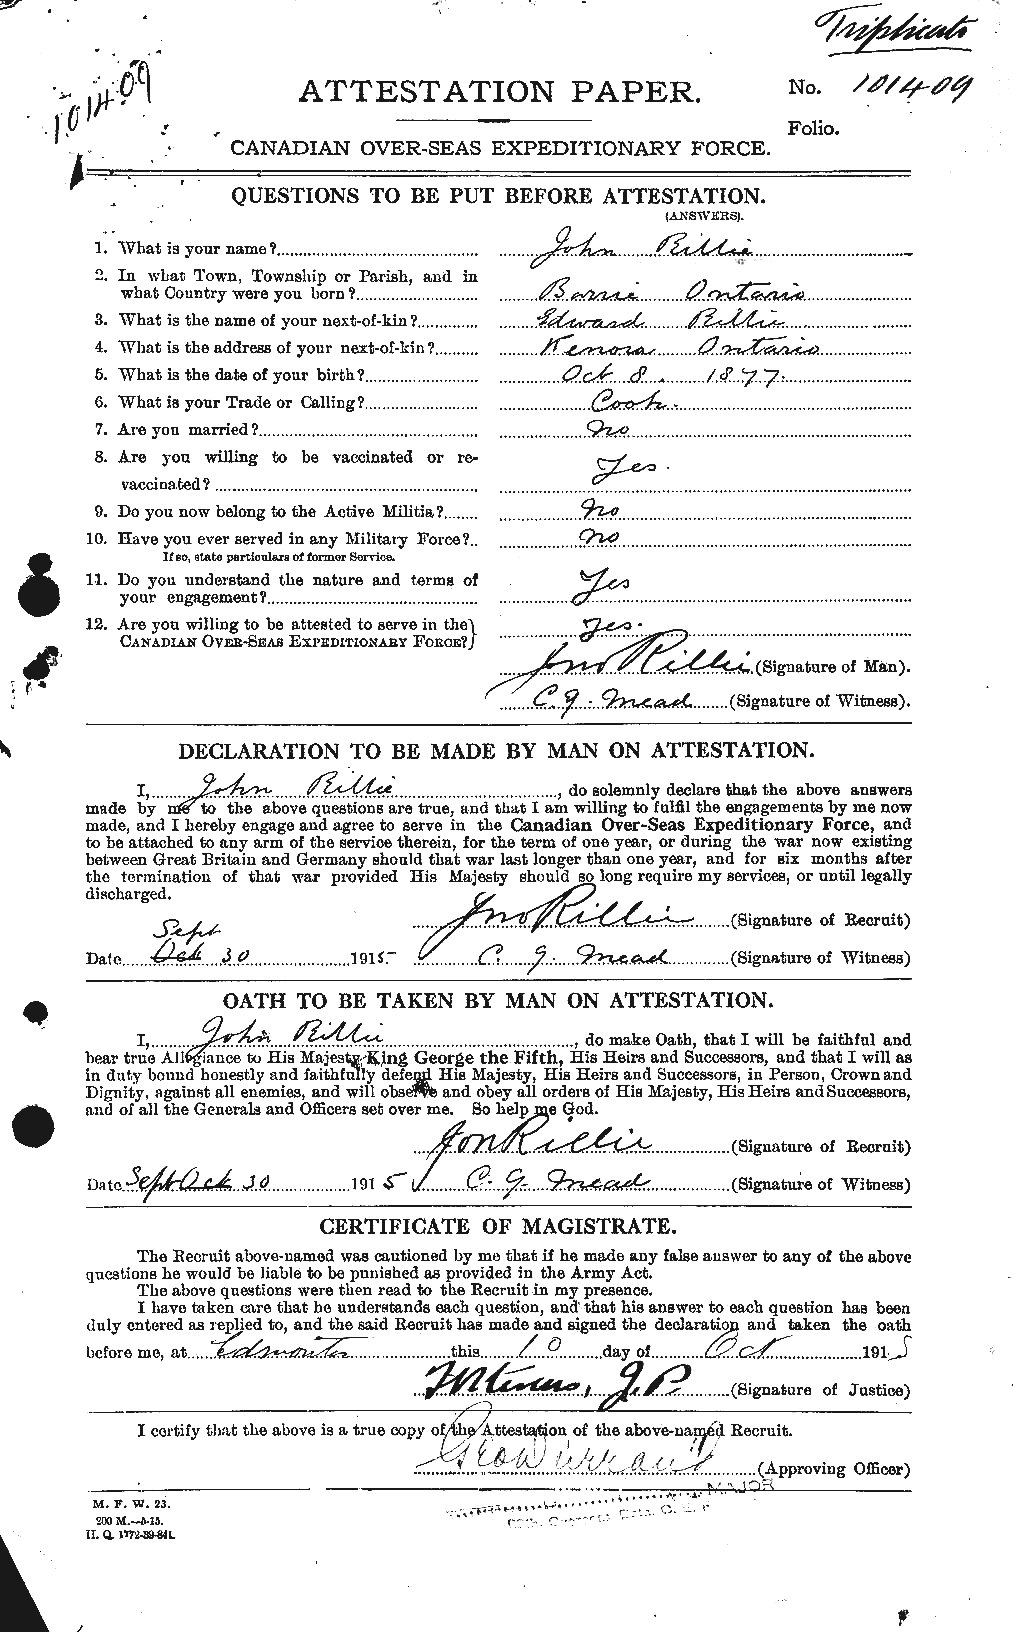 Personnel Records of the First World War - CEF 605460a